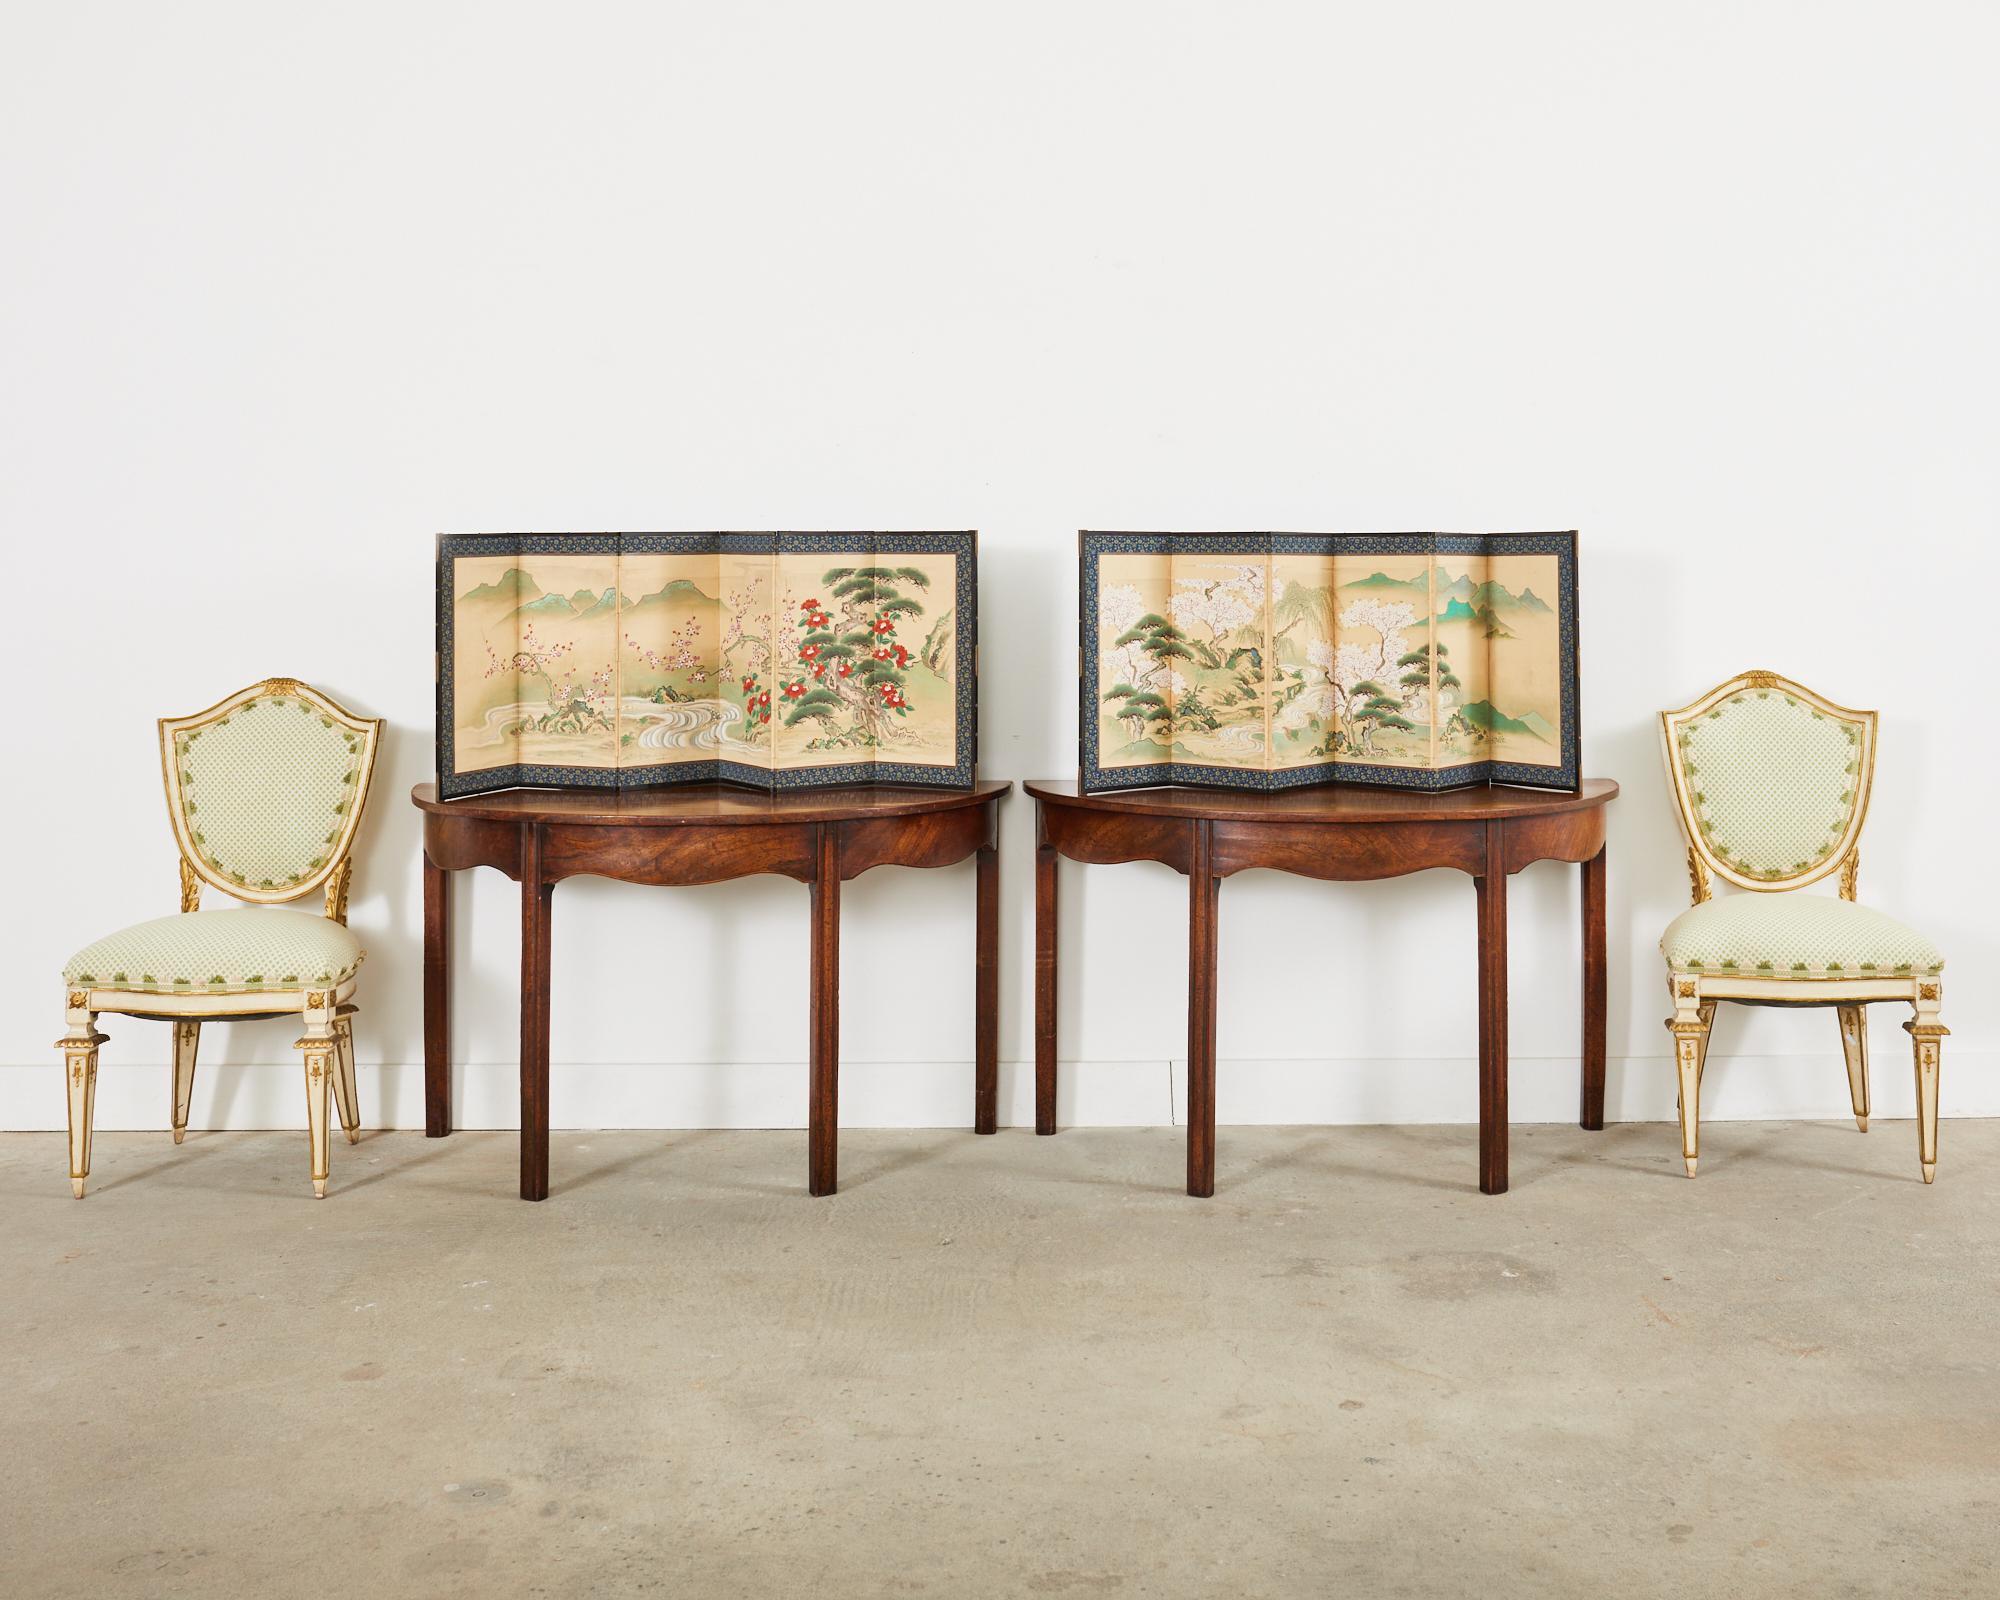 Colorful pair of 19th century Japanese Edo period six-panel byobu table screens depicting pairs of Minogame turtles in spring landscapes. Made in the Kano school style one screen features pines, willow, and flowering cherry trees. The other screen